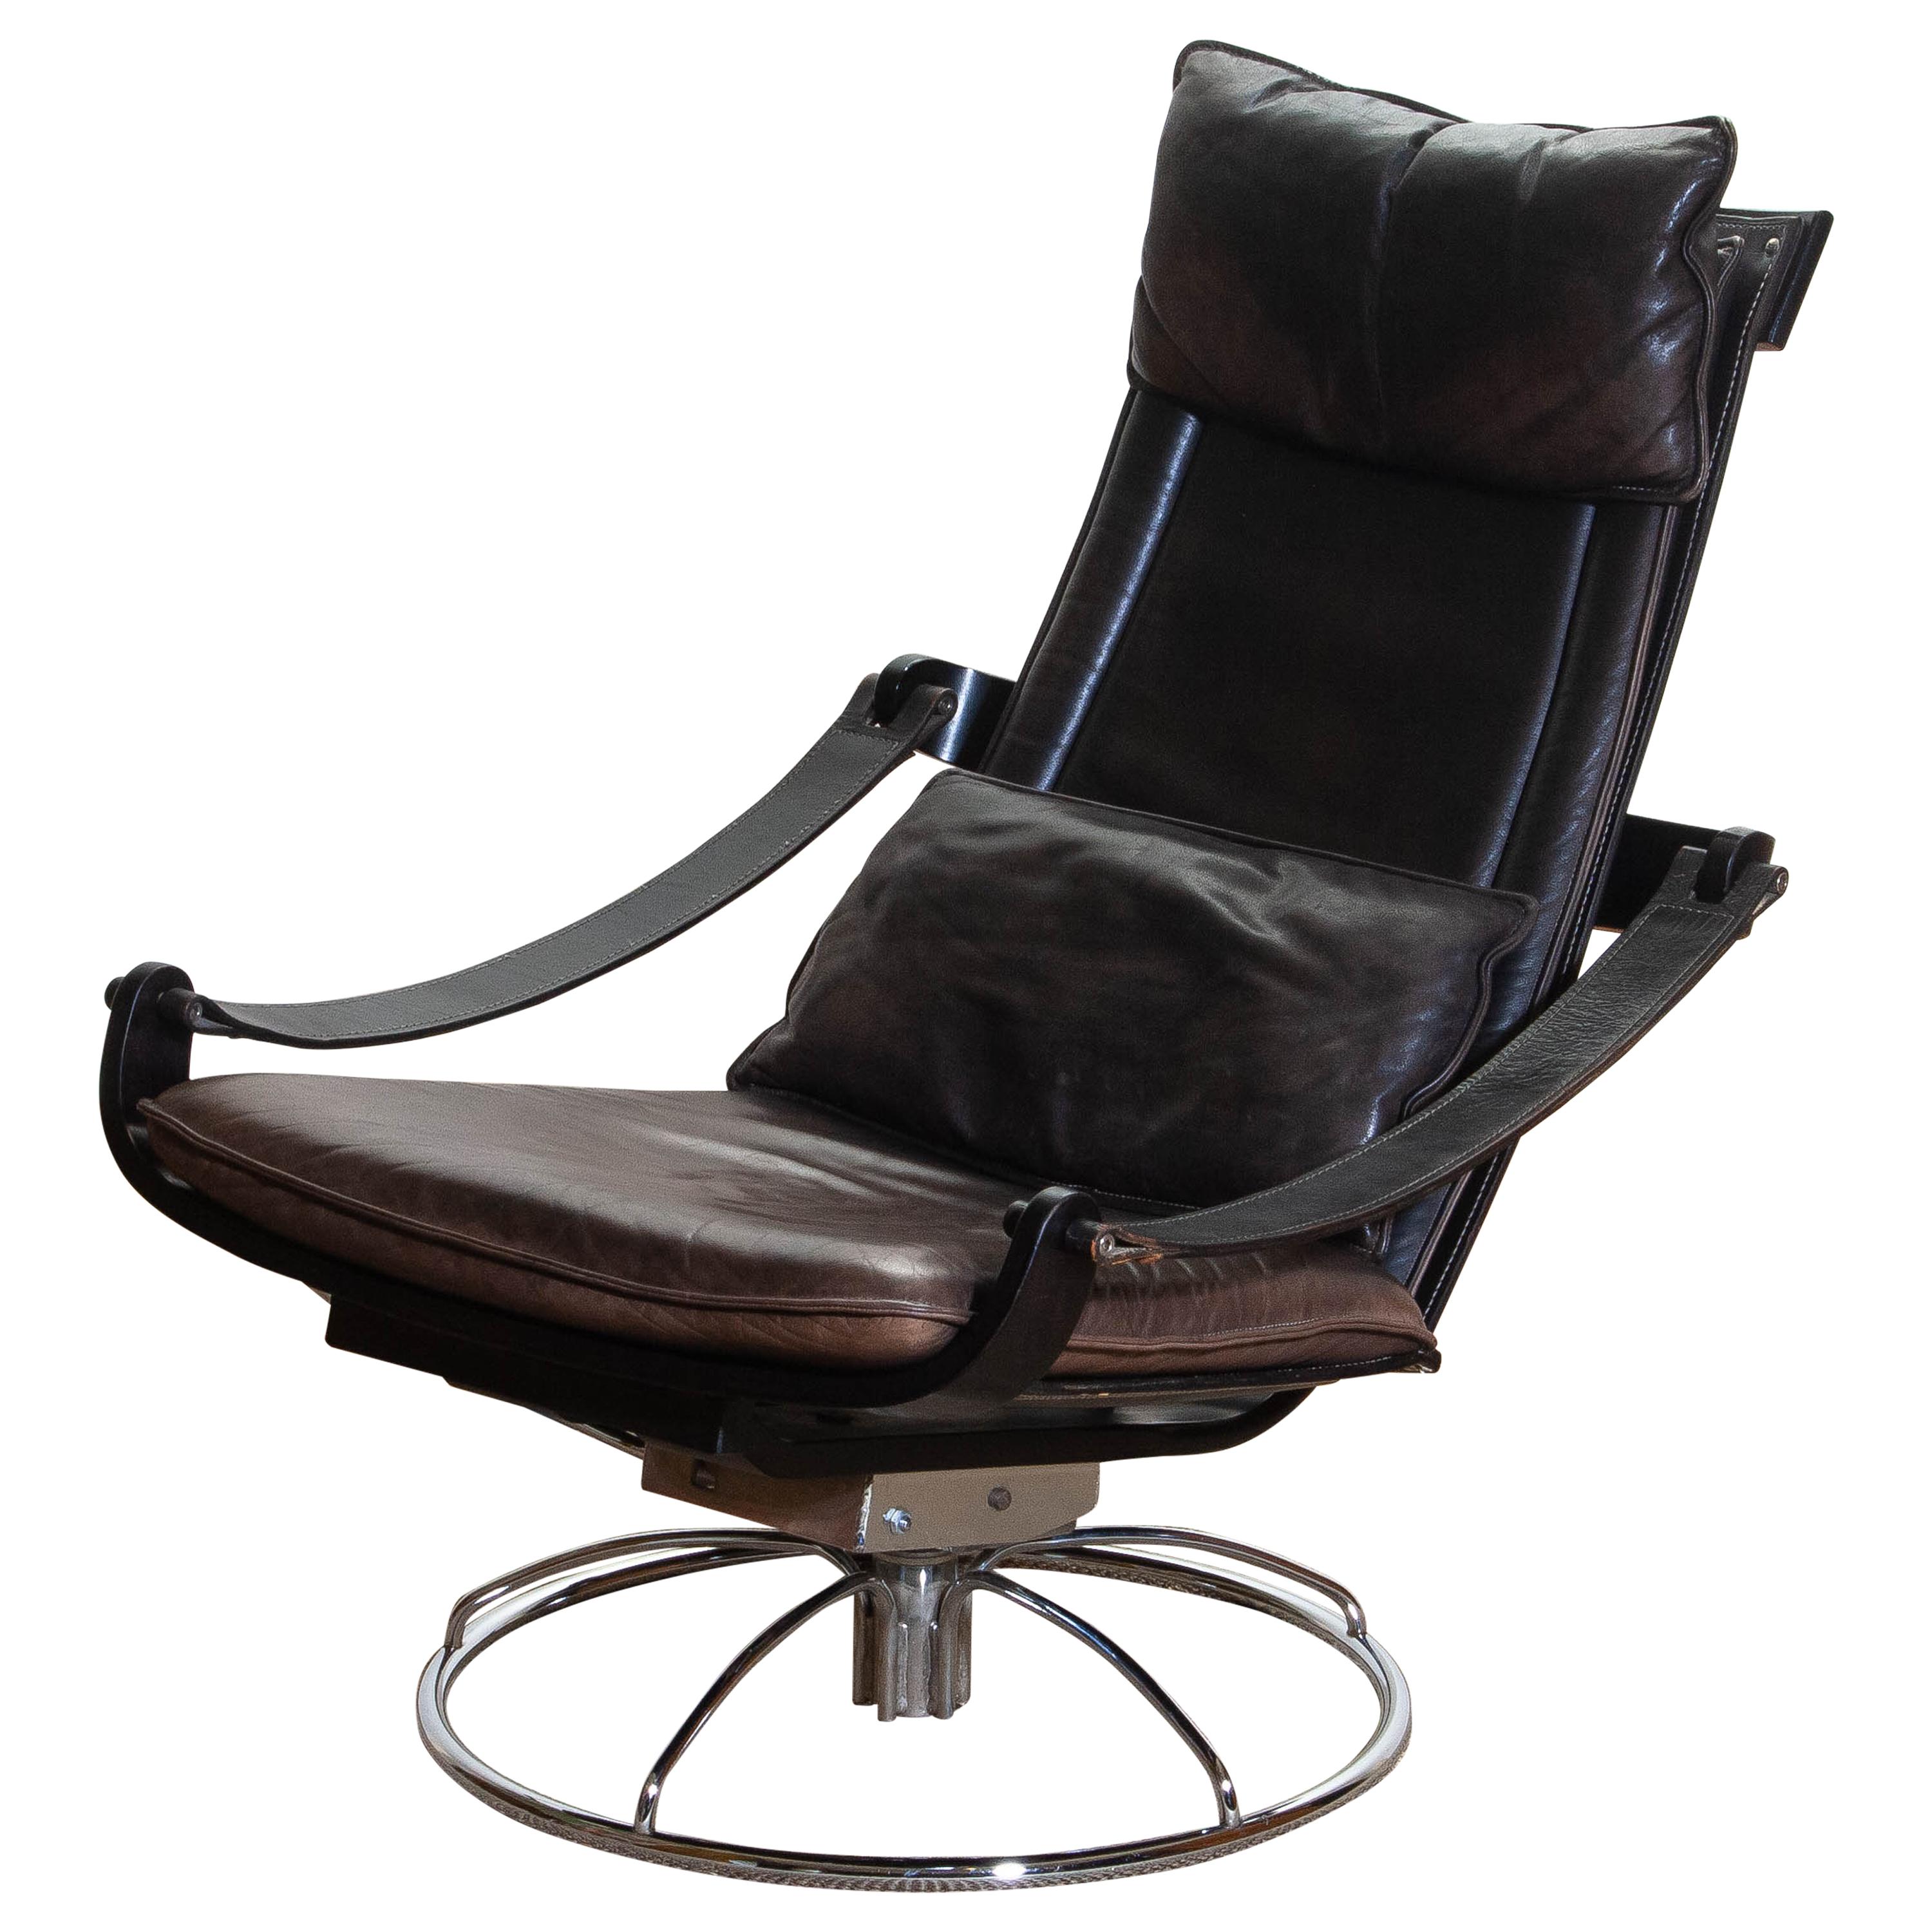 1970s Artistic Leather Swivel / Relax Chair by Ake Fribytter for Nelo, Sweden 8